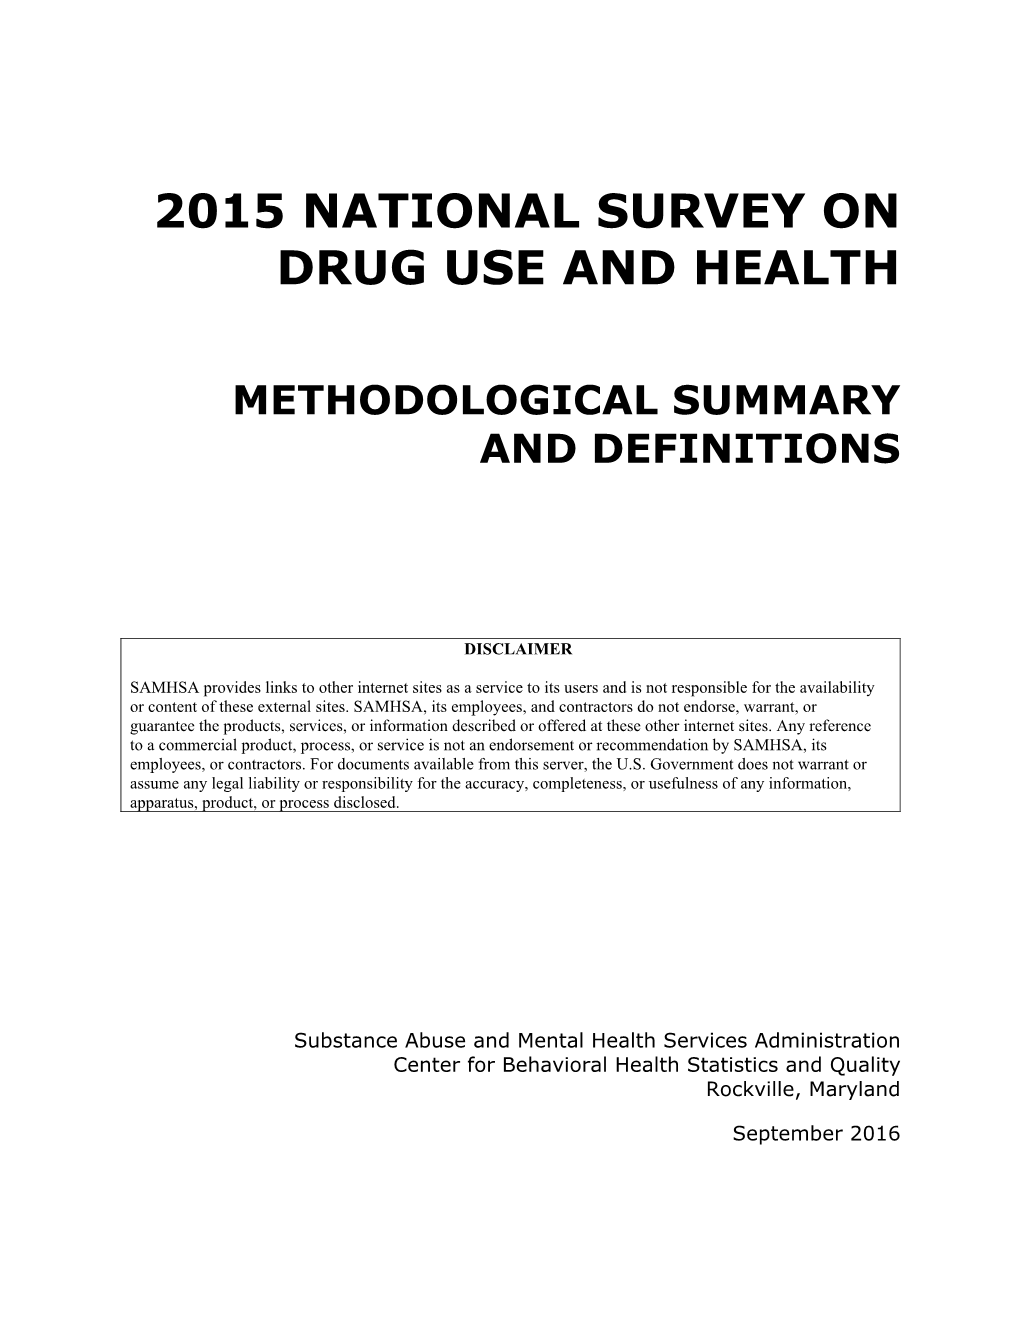 2015 National Survey on Drug Use and Health